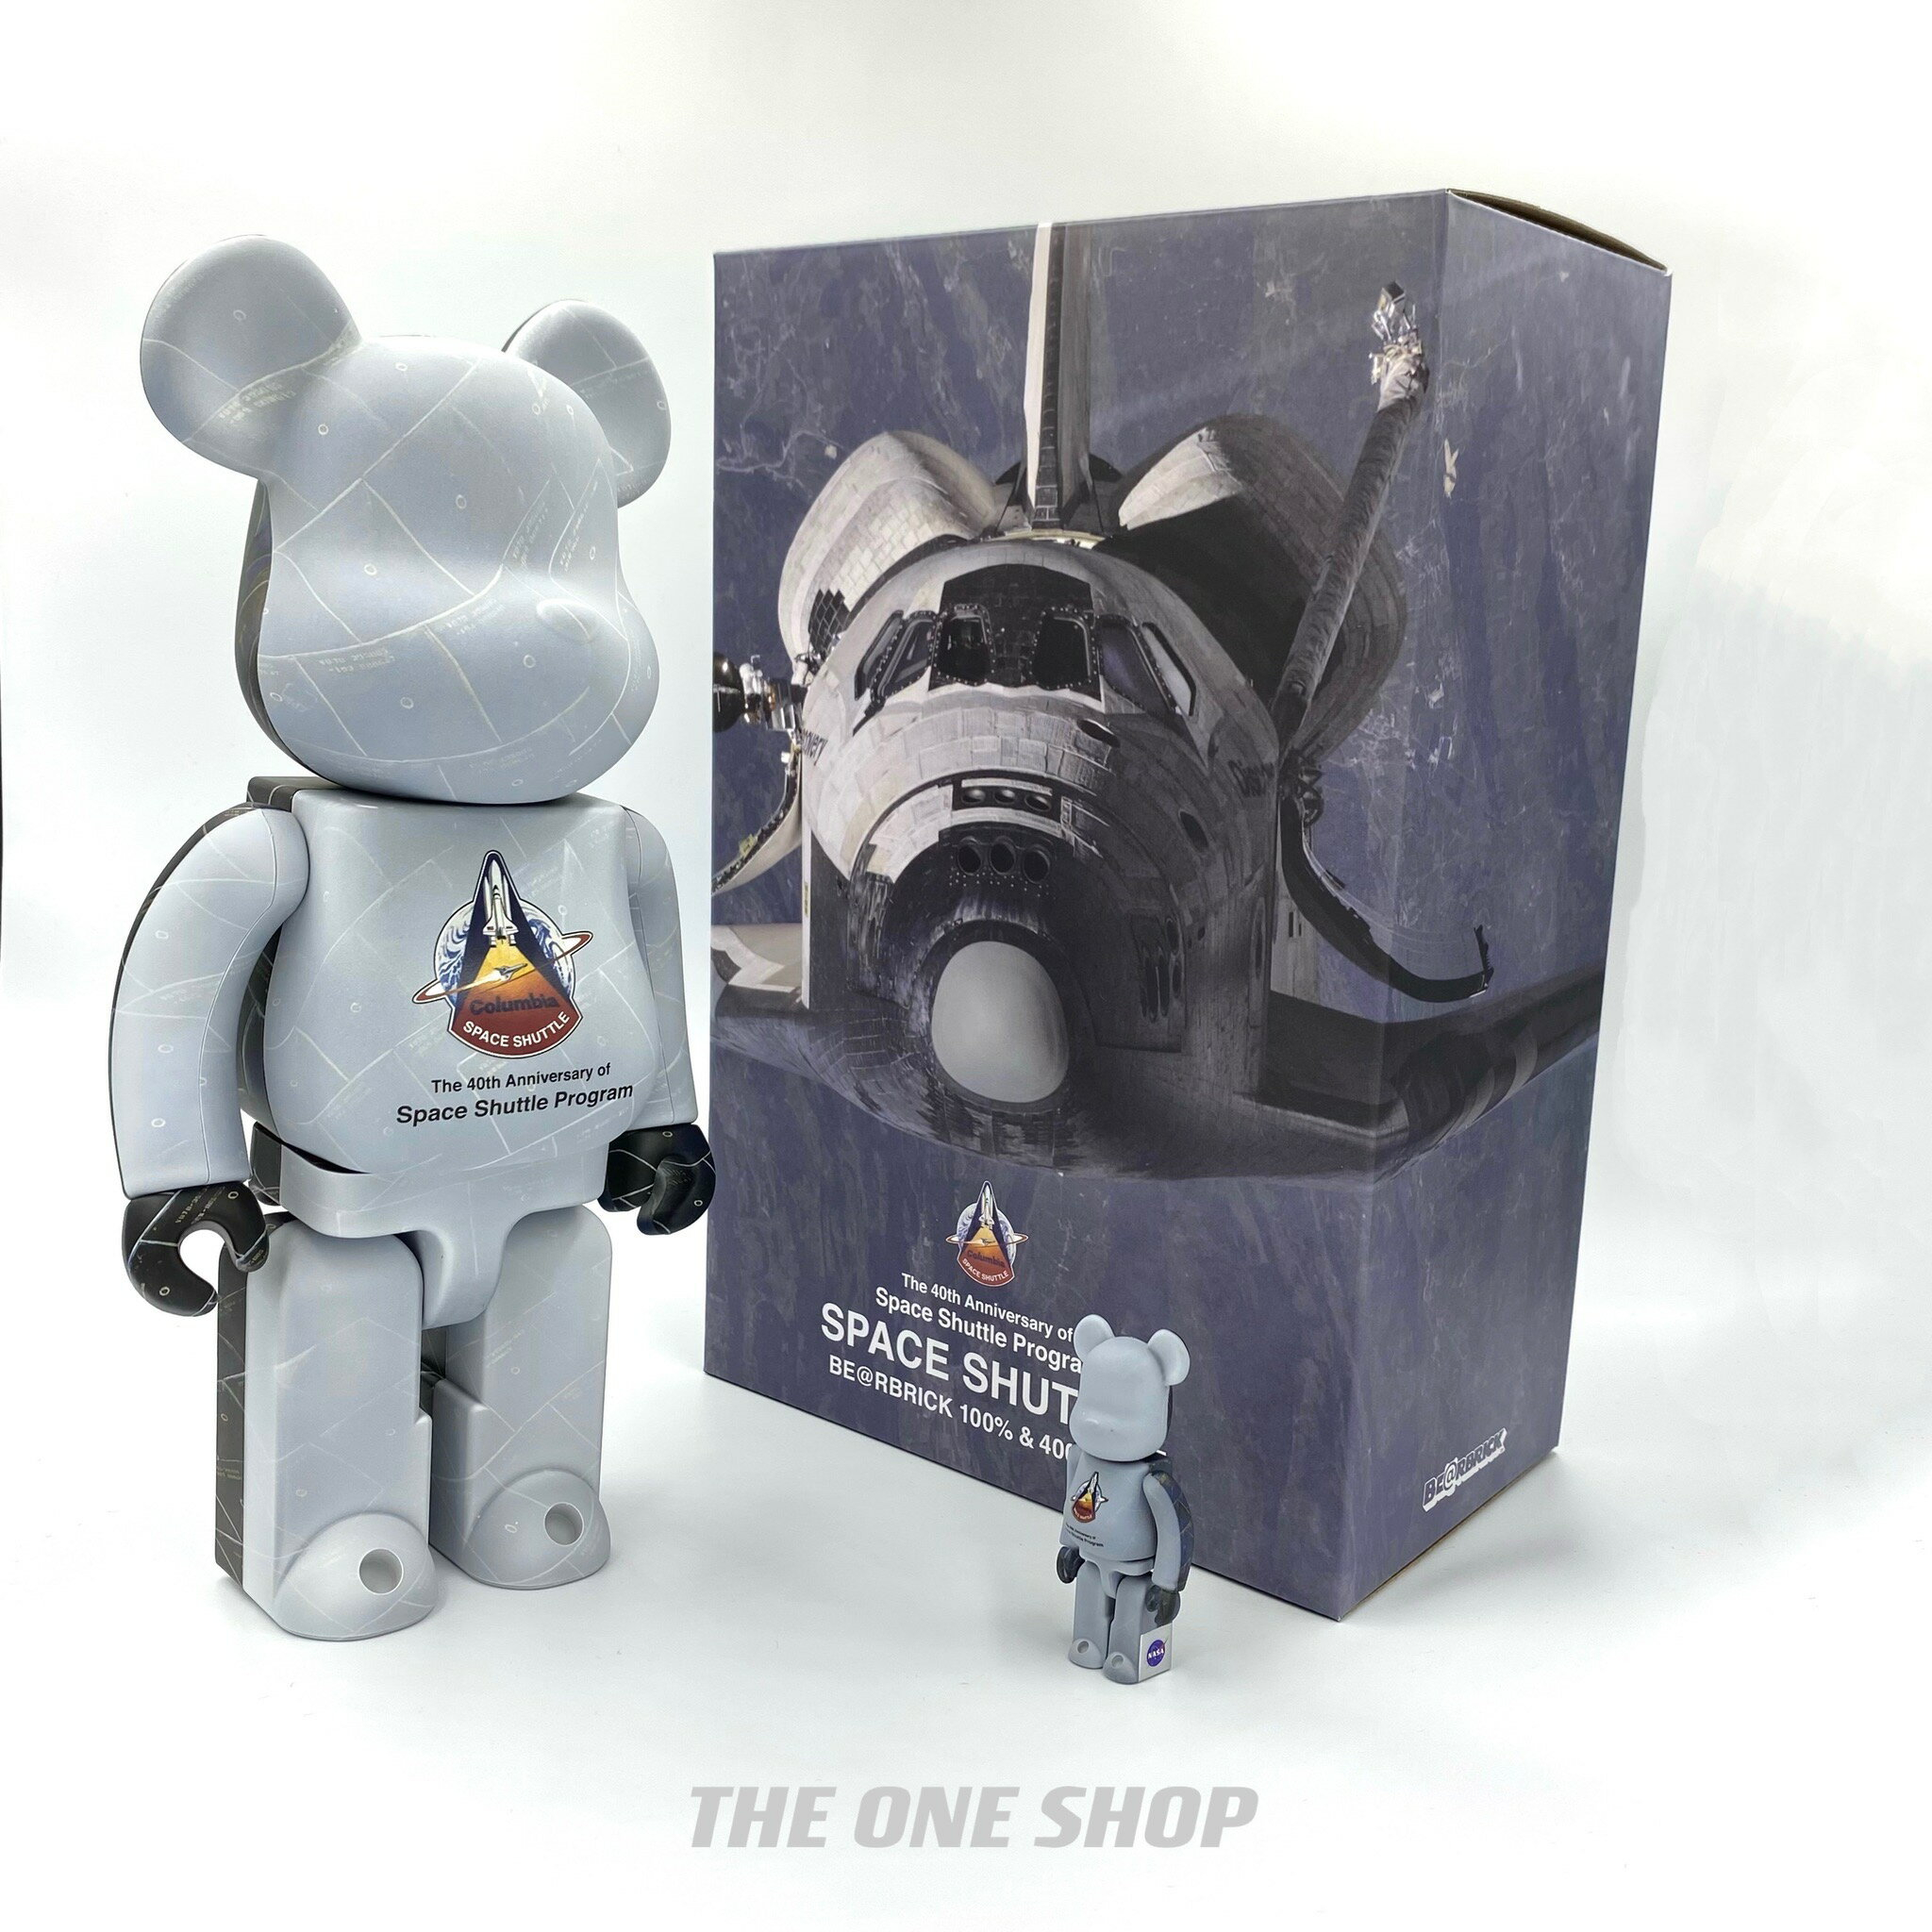 SPACE SHUTTLE BE@RBRICK 100% 400%